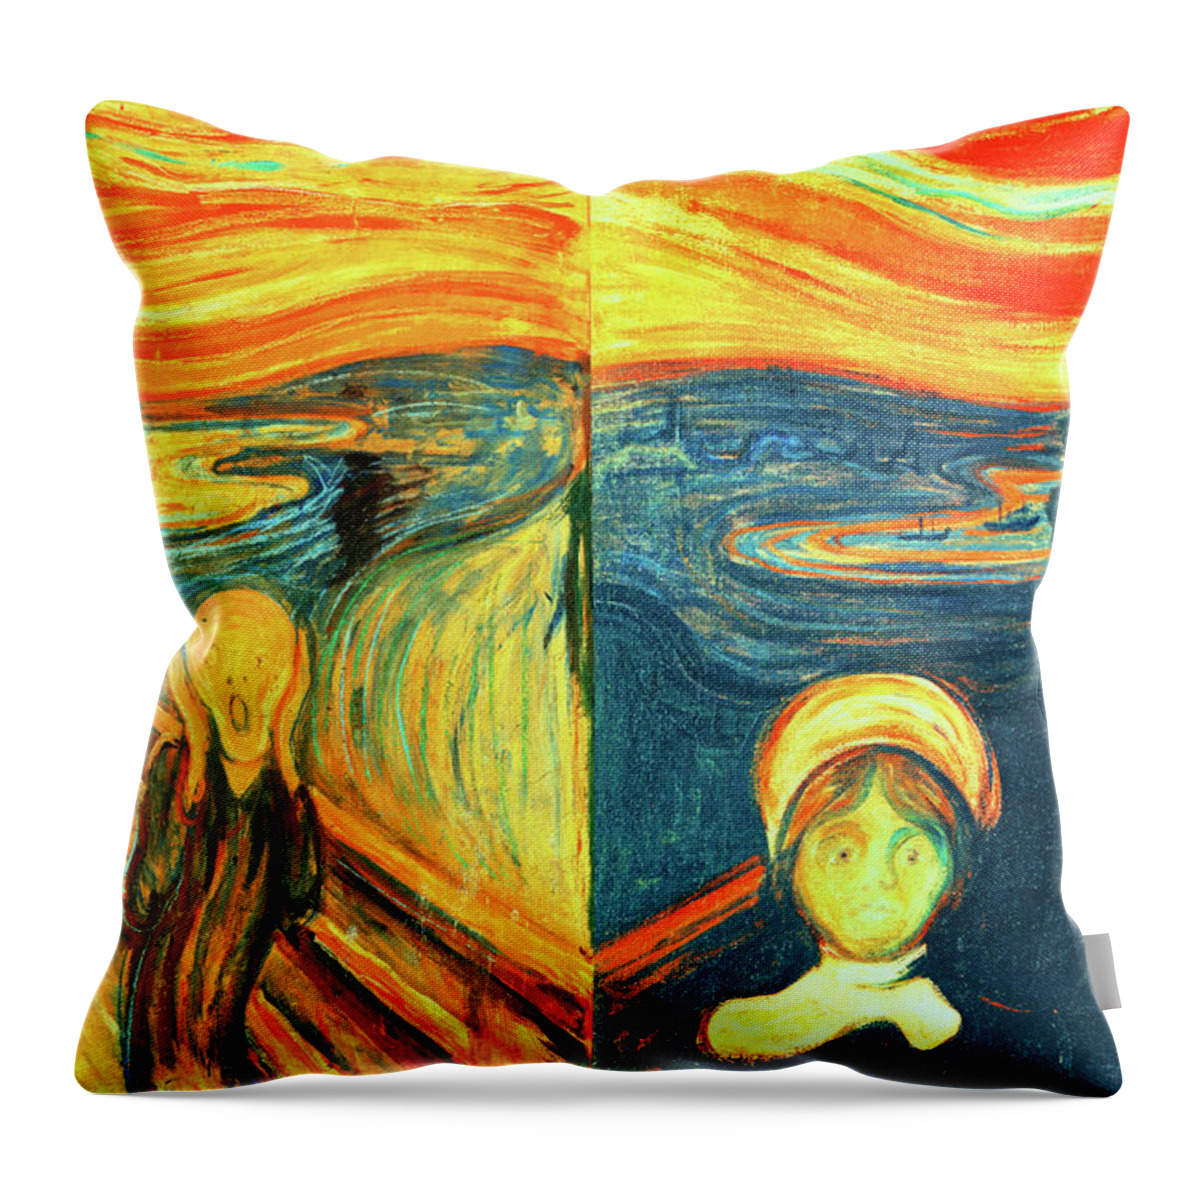 The Scream Throw Pillow featuring the digital art Scream and Anxiety by Edvard Munch - collage by Nicko Prints